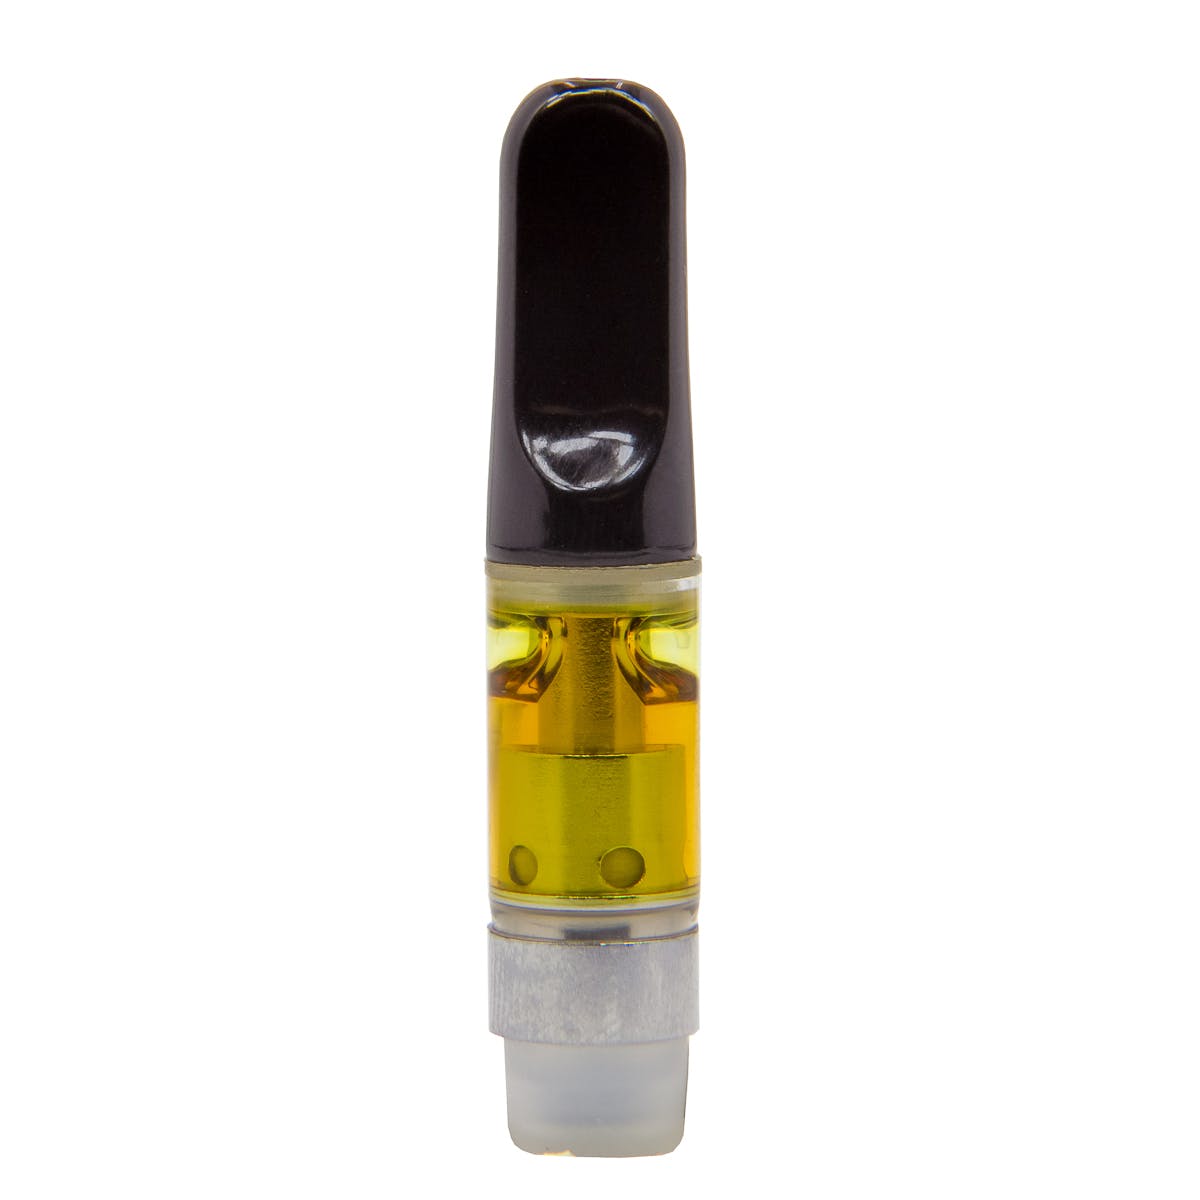 HONEY COMB EXTRACTS - 0,5g CLEAR CARTRIDGE